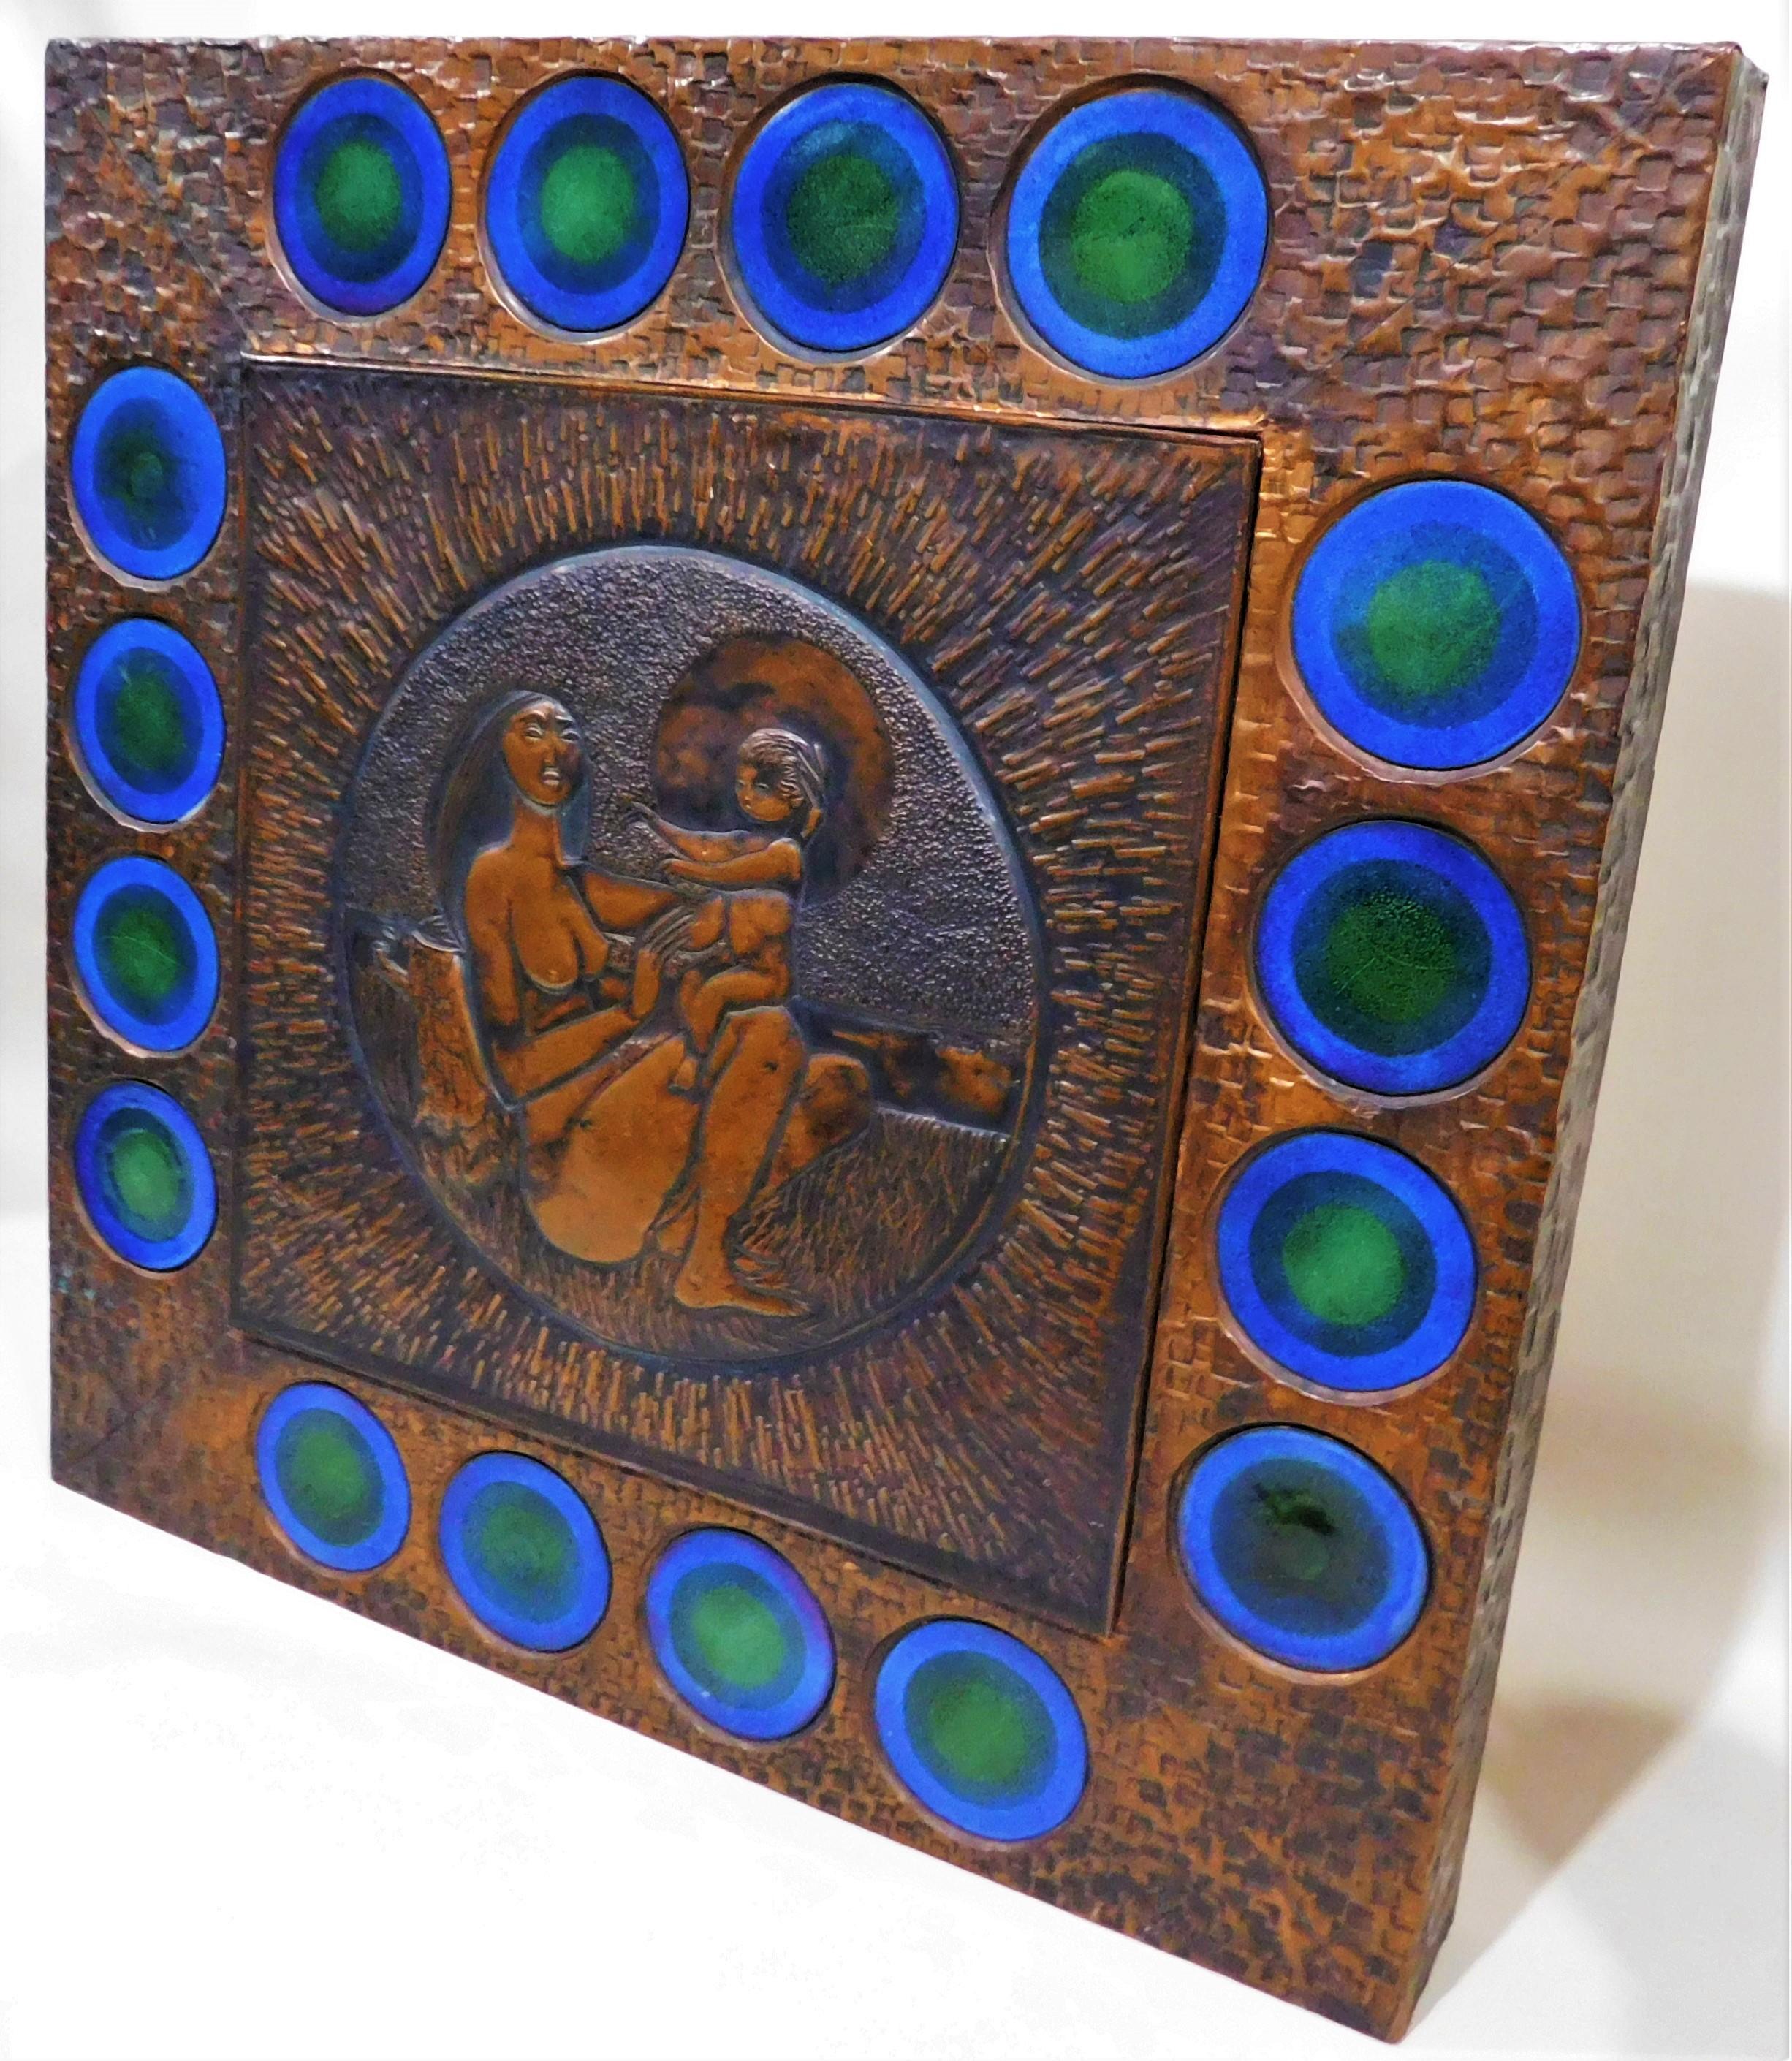 Copper-muralist artist Laszlo Buday came to Canada in 1957 from his native Budapest, Hungary. This original piece is a hand-hammered signed copper metal work on wood of a nude woman and child, with 16 blue enamel pieces surrounding the inner